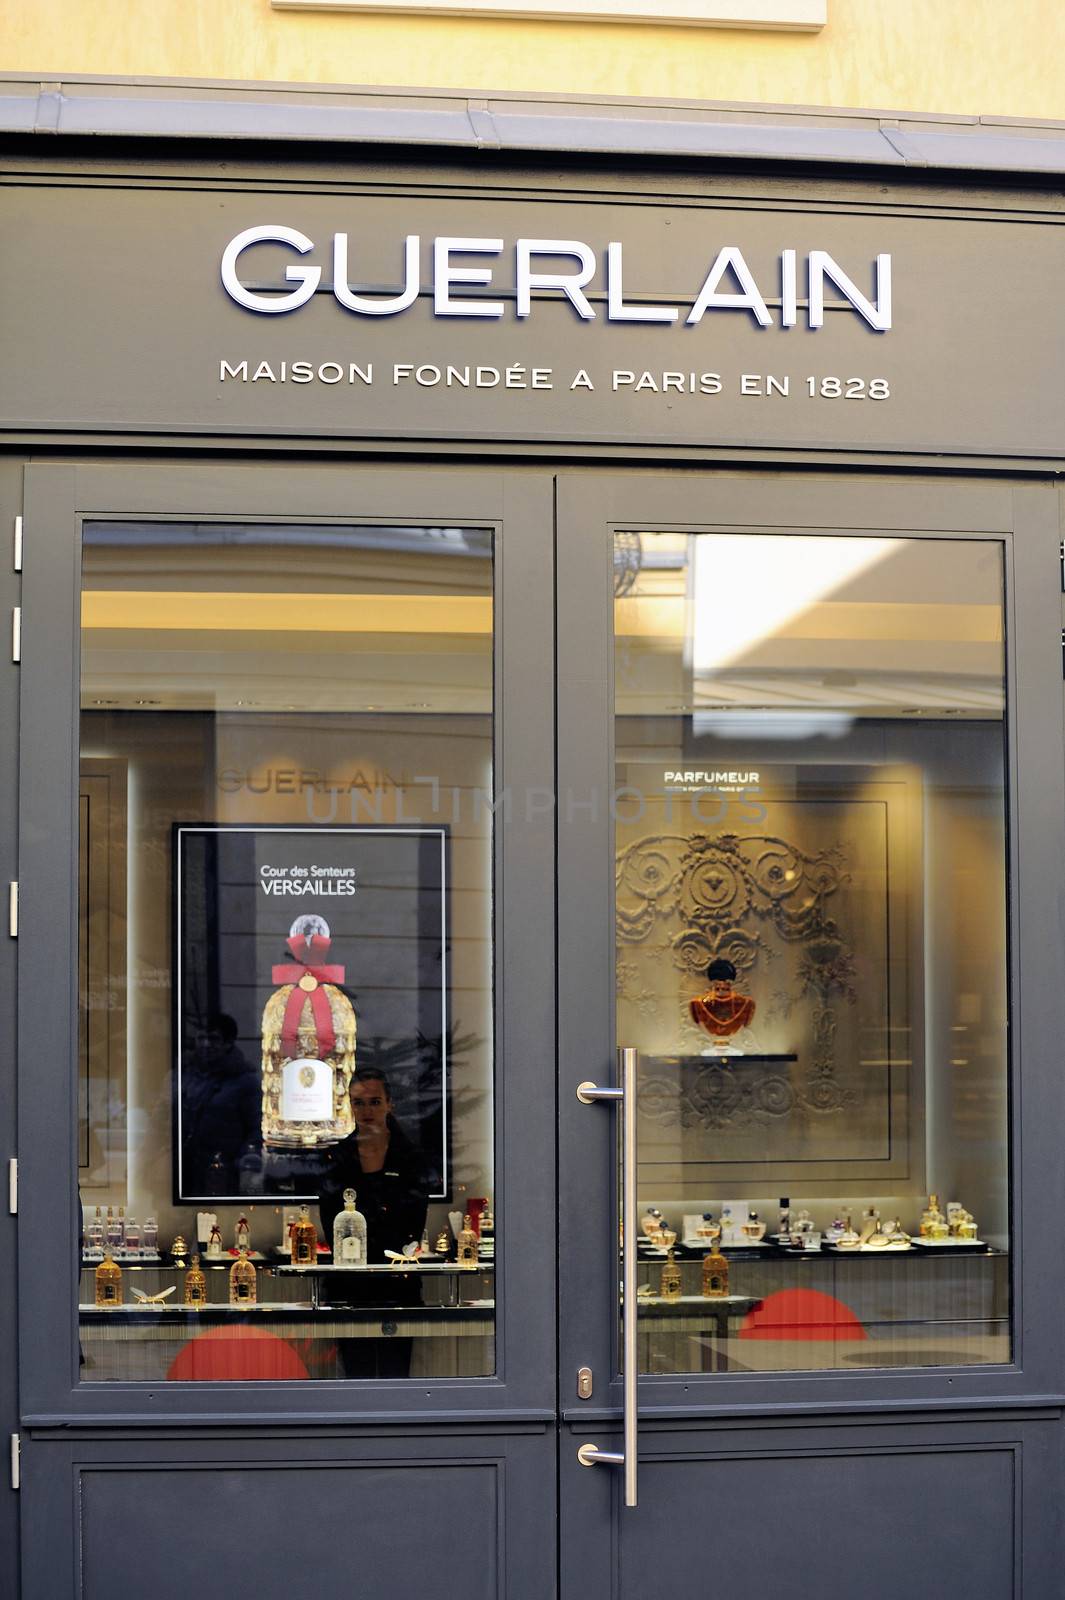 Guerlain Boutique of Versailles located in the passage of scents